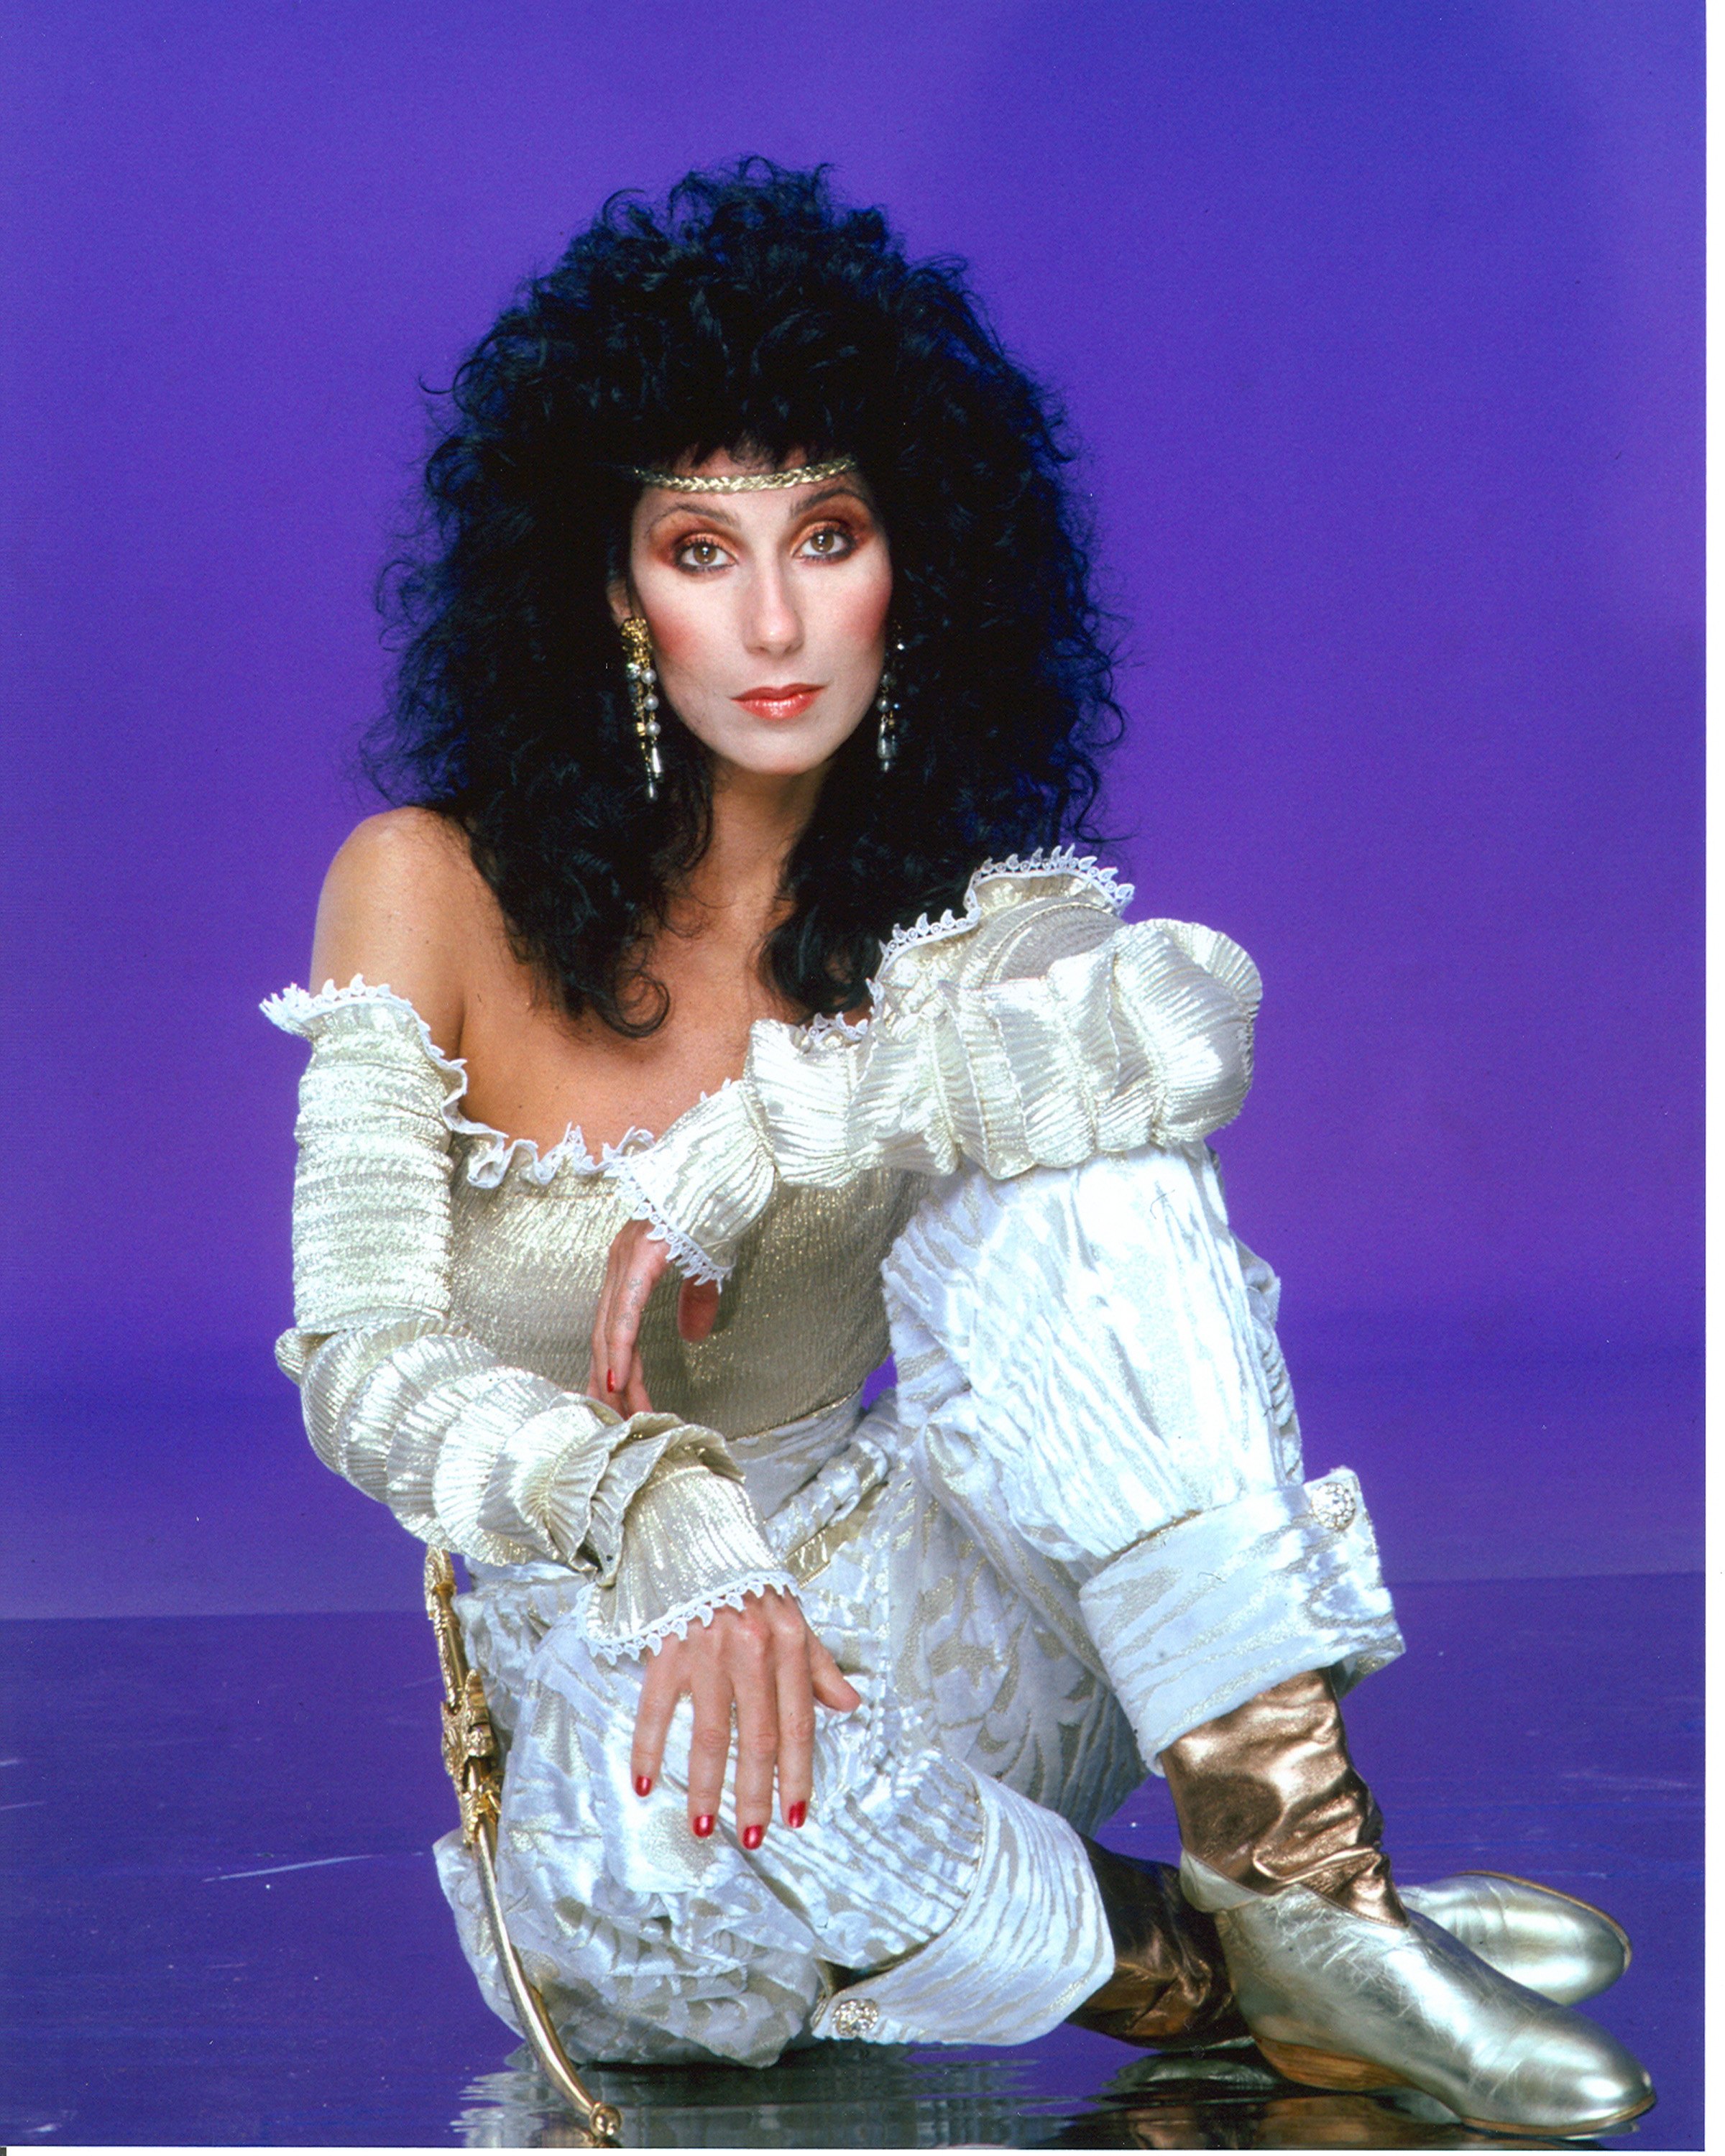 Cher poses for a portrait in June 1981 in Los Angeles, California | Source: Getty Images